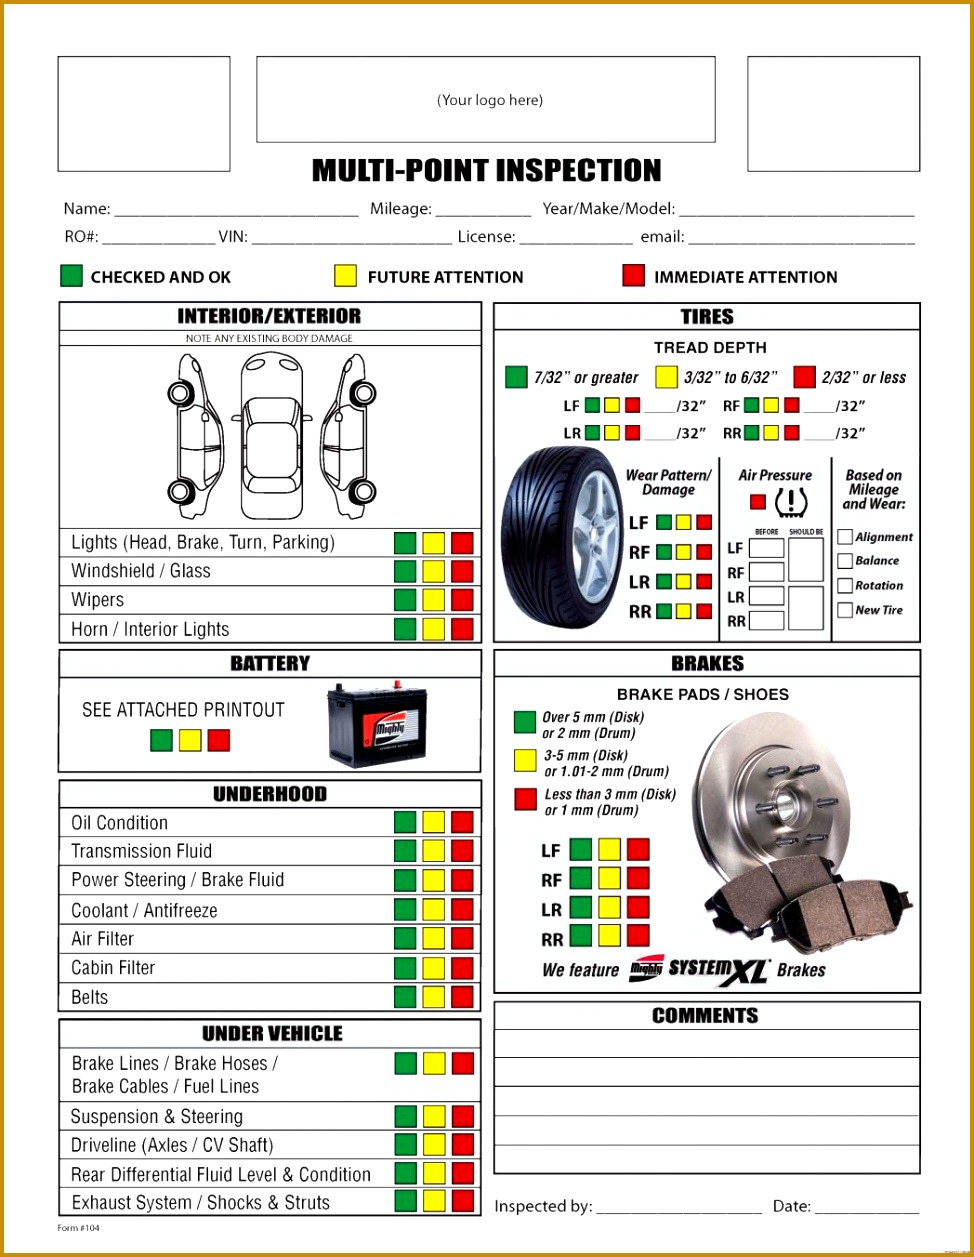 Motor Vehicle Inspection Checklist Template Vehicle Ideas 9741257